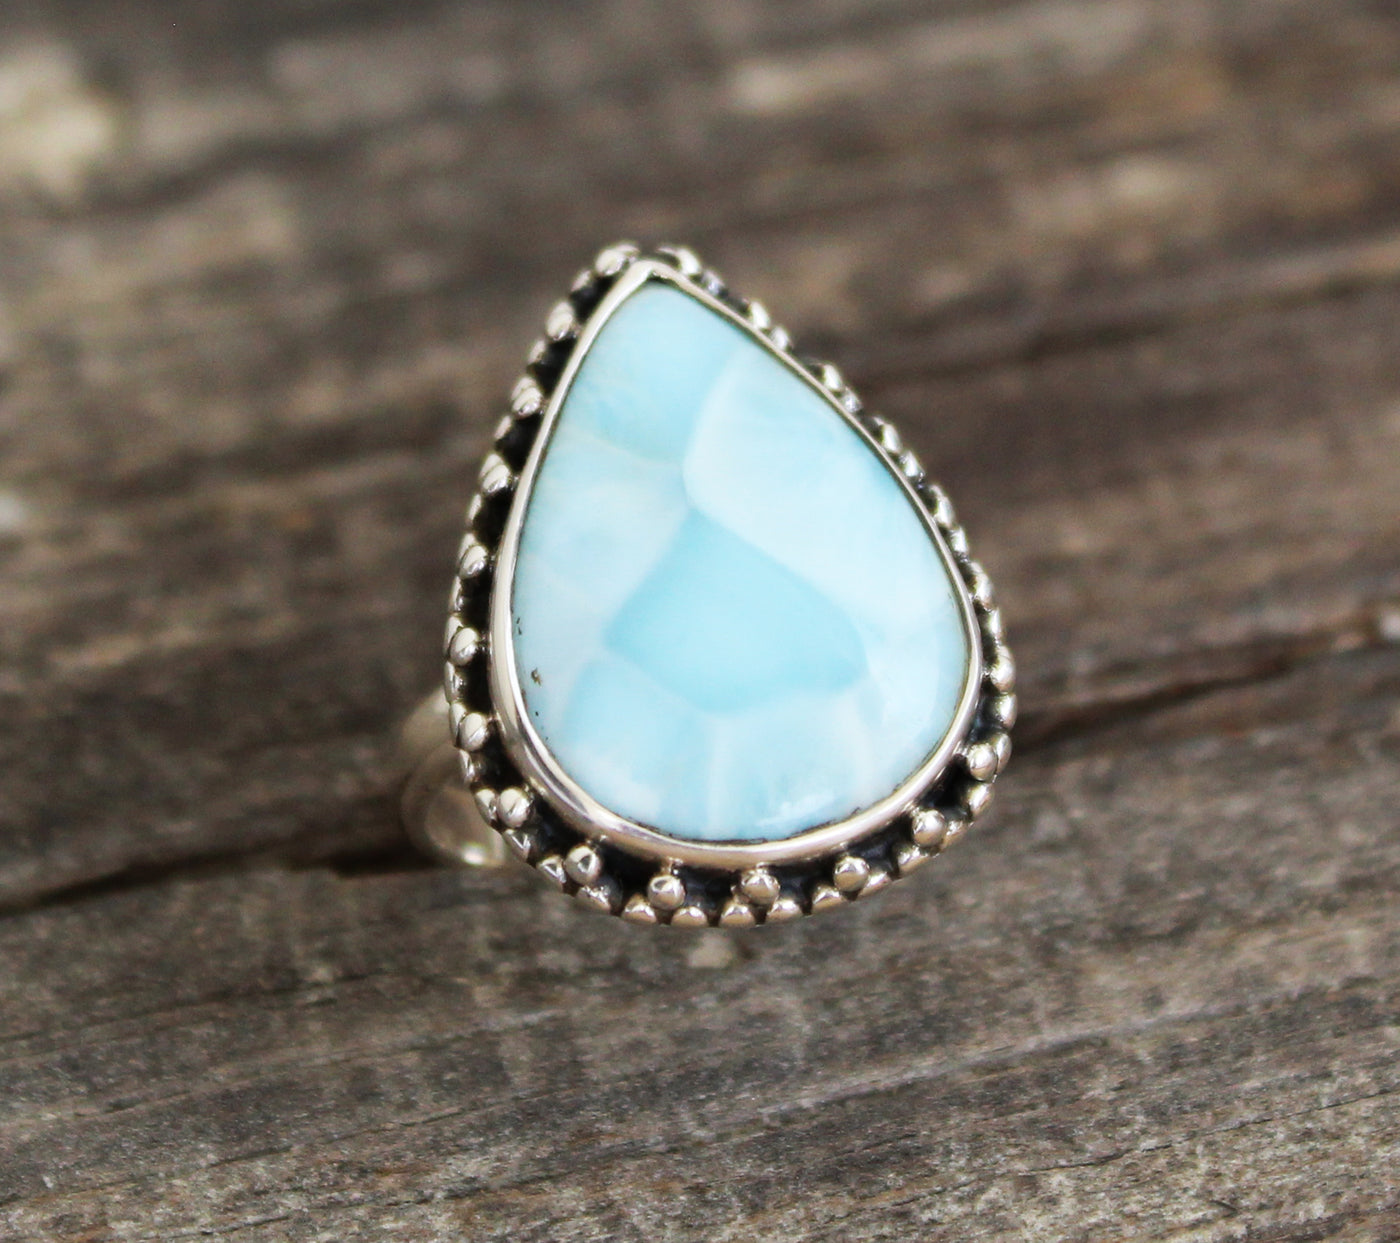 Genuine Larimar Ring, March Birthstone, 925 Sterling Silver, Handmade Unique Ring, Blue Stone Ring, Pear Shape Ring